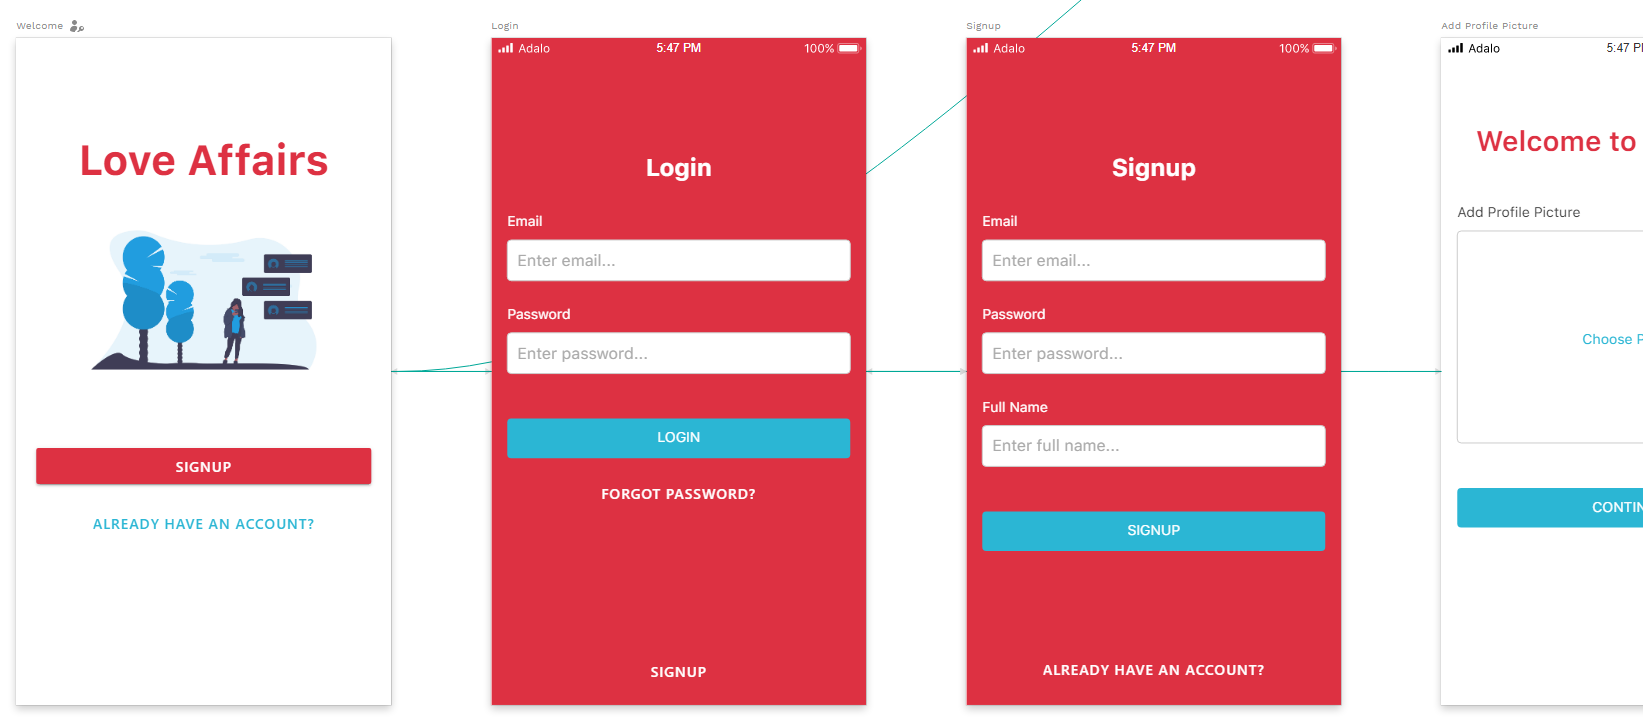 Build your own app — control literally every element of your dating app